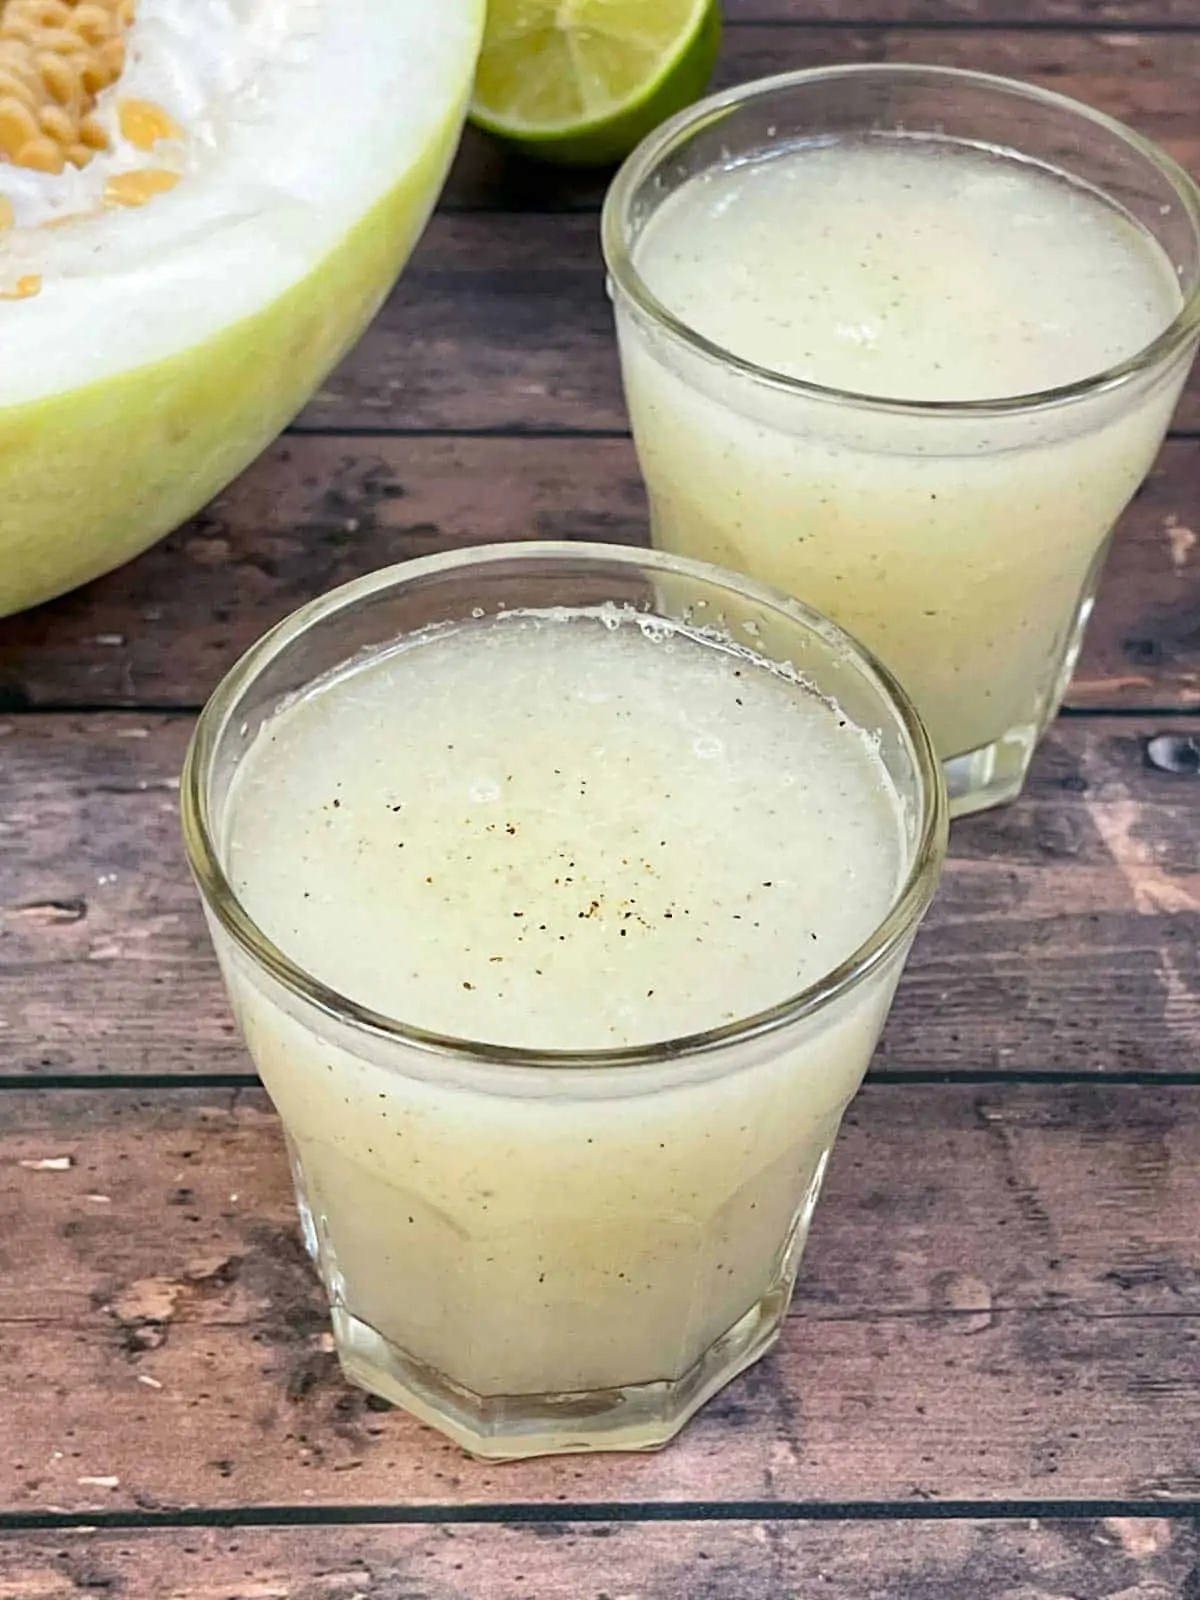 winter melon (ash gourd) juice served in a juice glass with a piece of ash gourd on the side